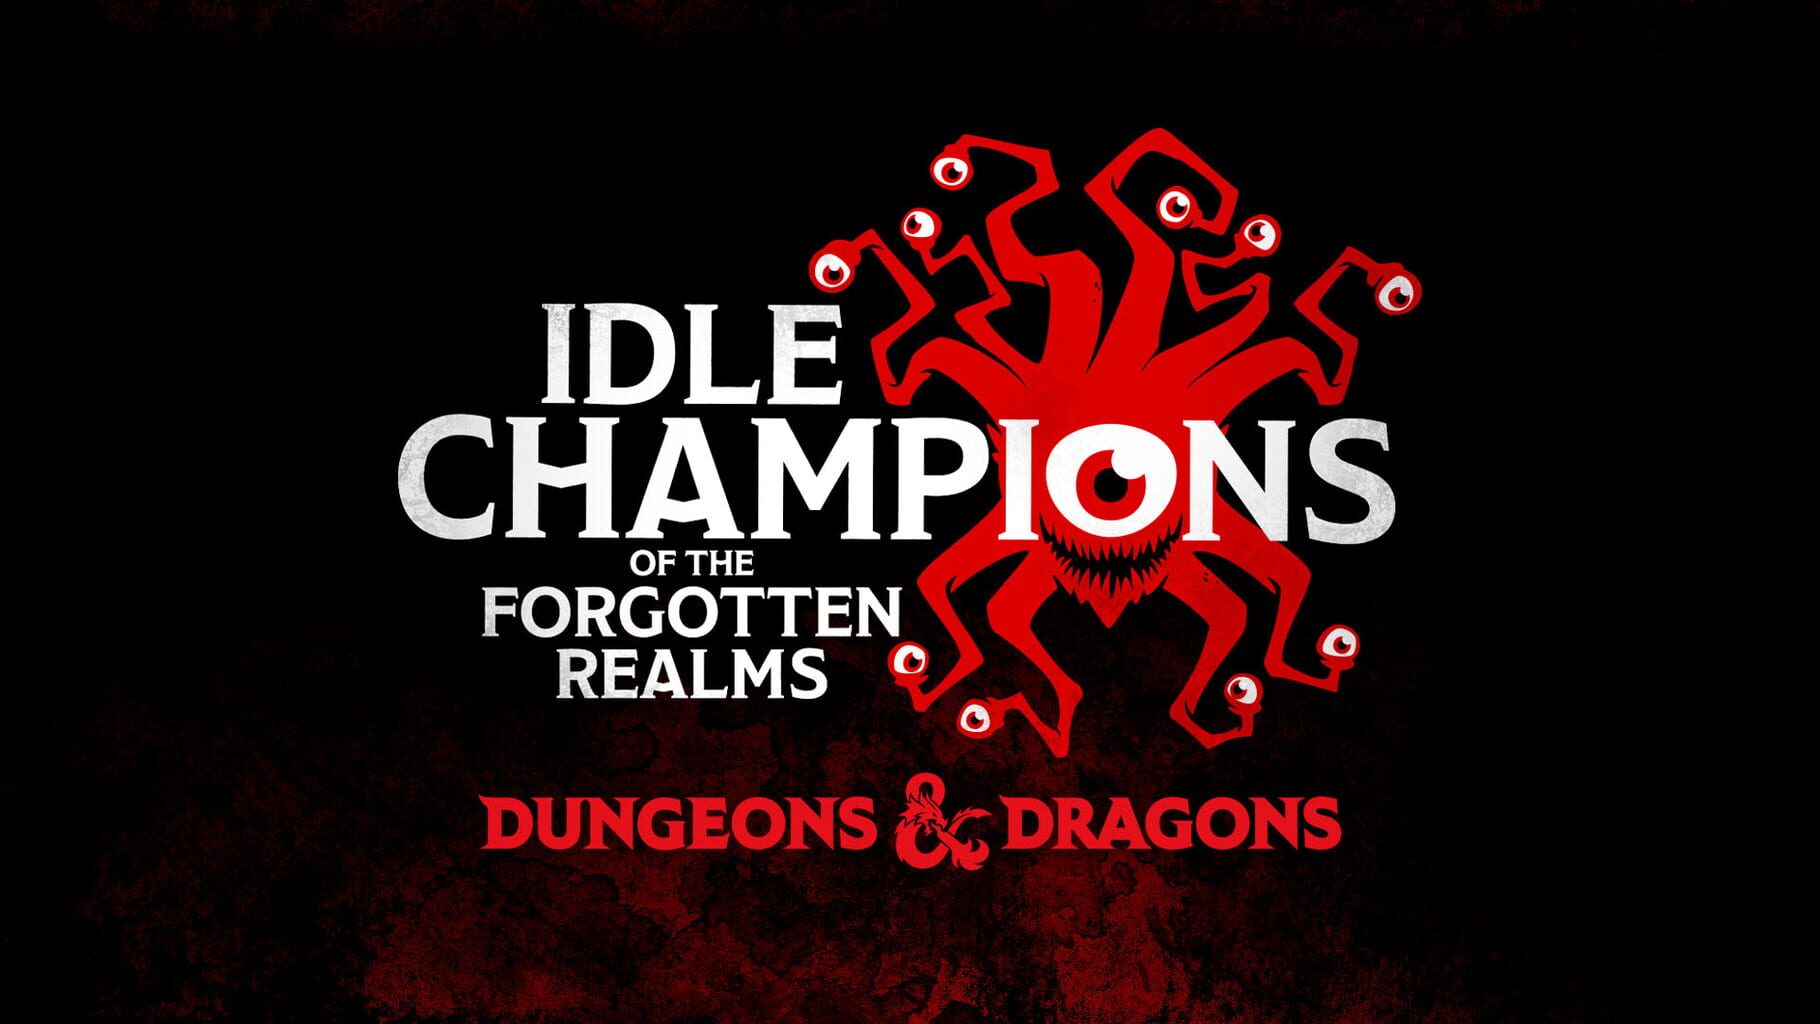 Idle Champions of the Forgotten Realms artwork